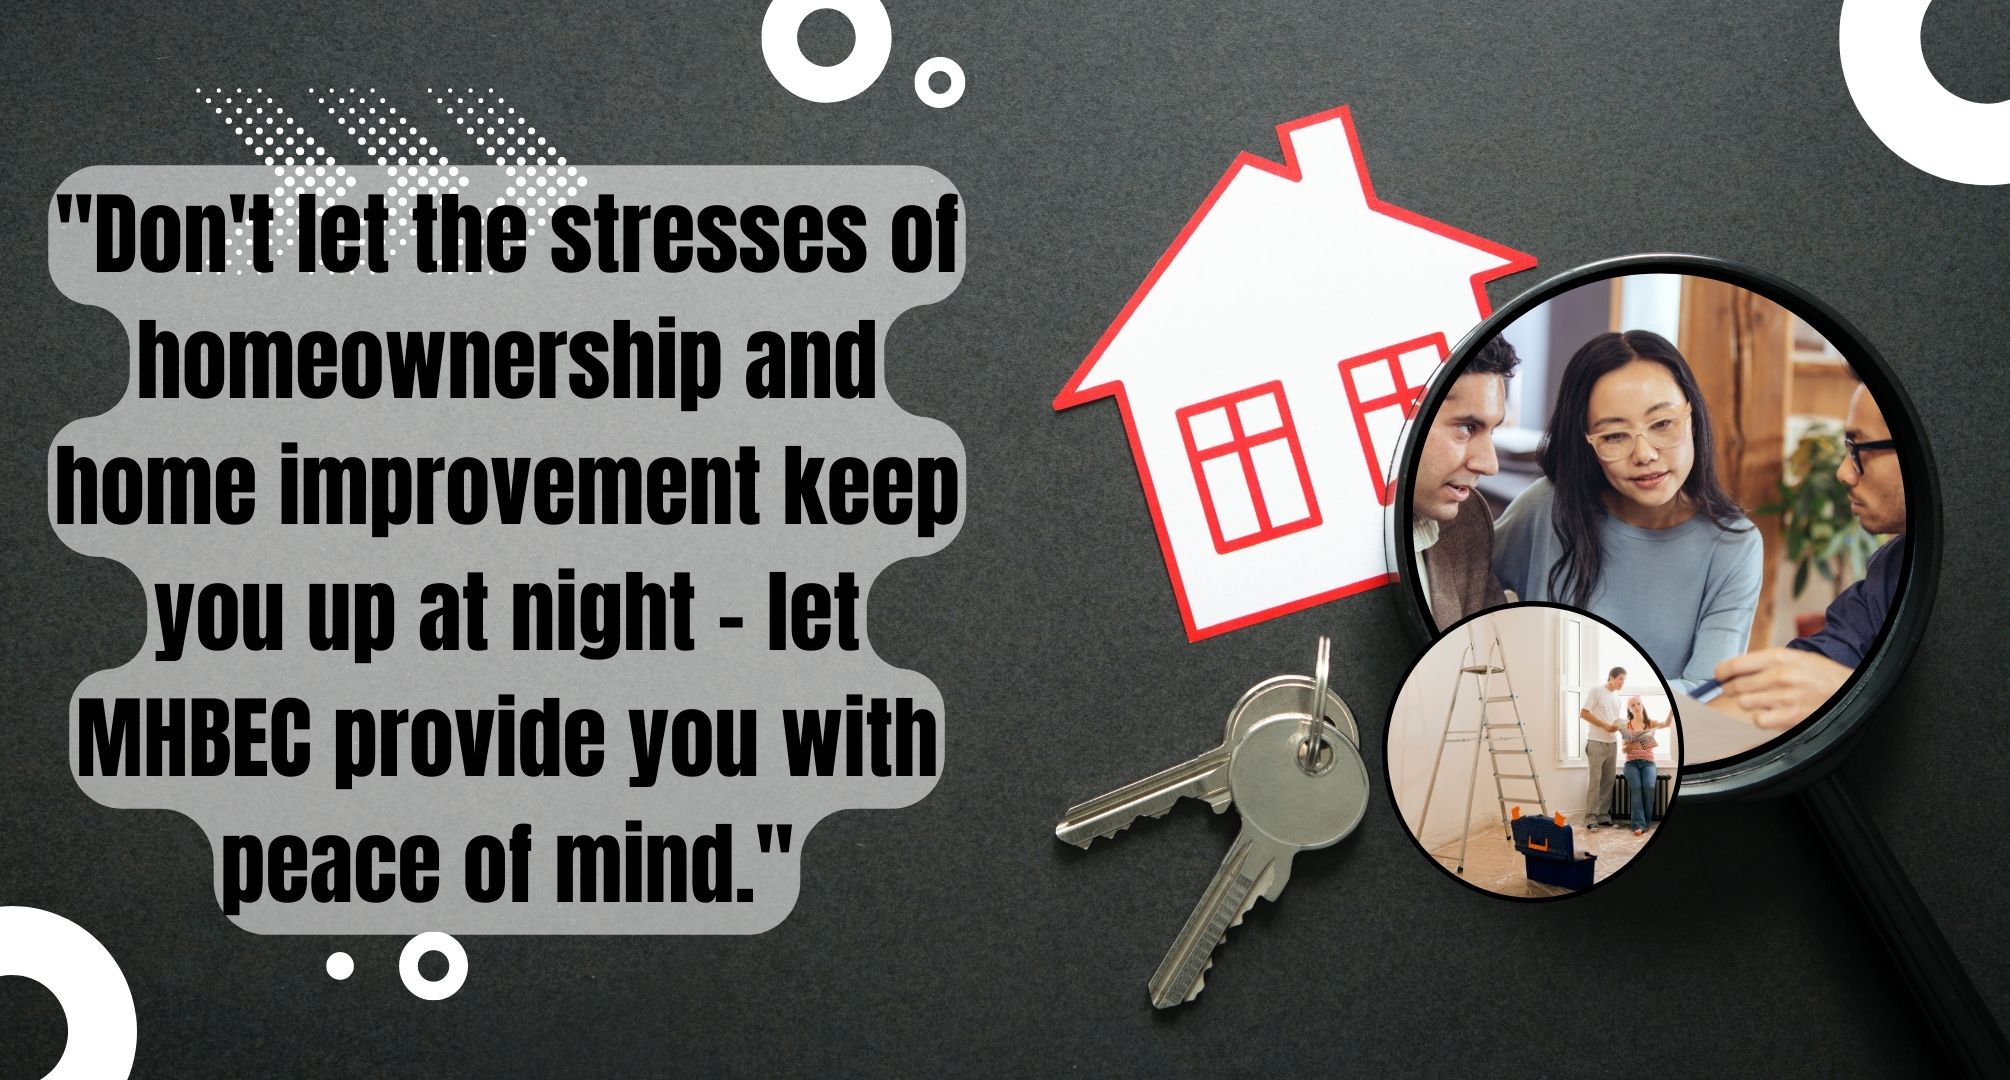 Experience Peace of Mind with MHBEC as Your Trusted Partner for Homeownership and Home Improvement